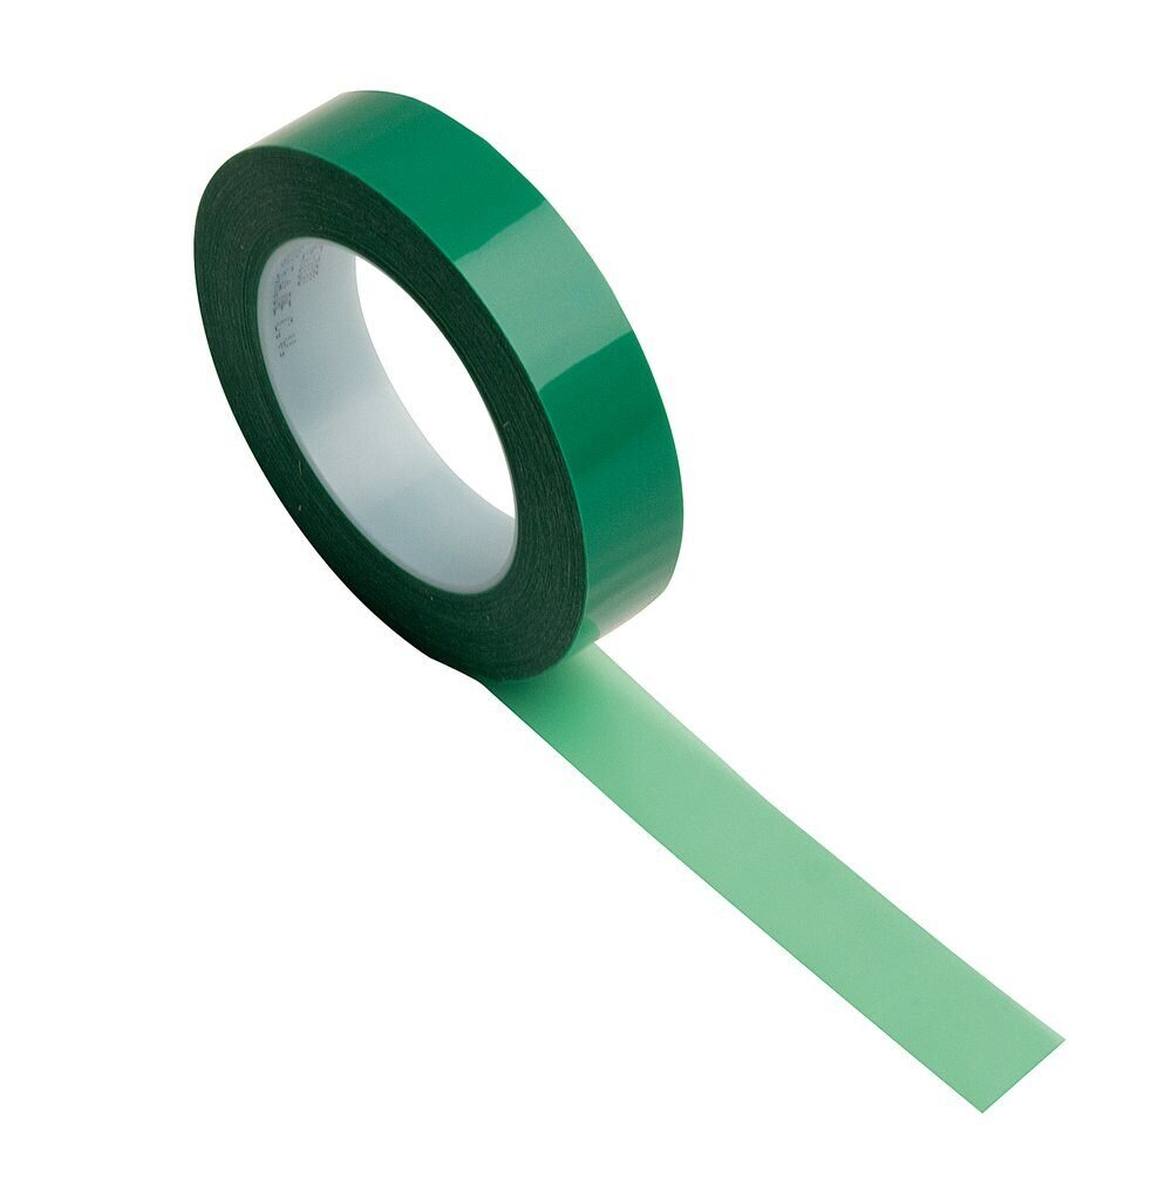 3M high temperature polyester adhesive tape 851, green, 19 mm x 66 m, 101.6 µm